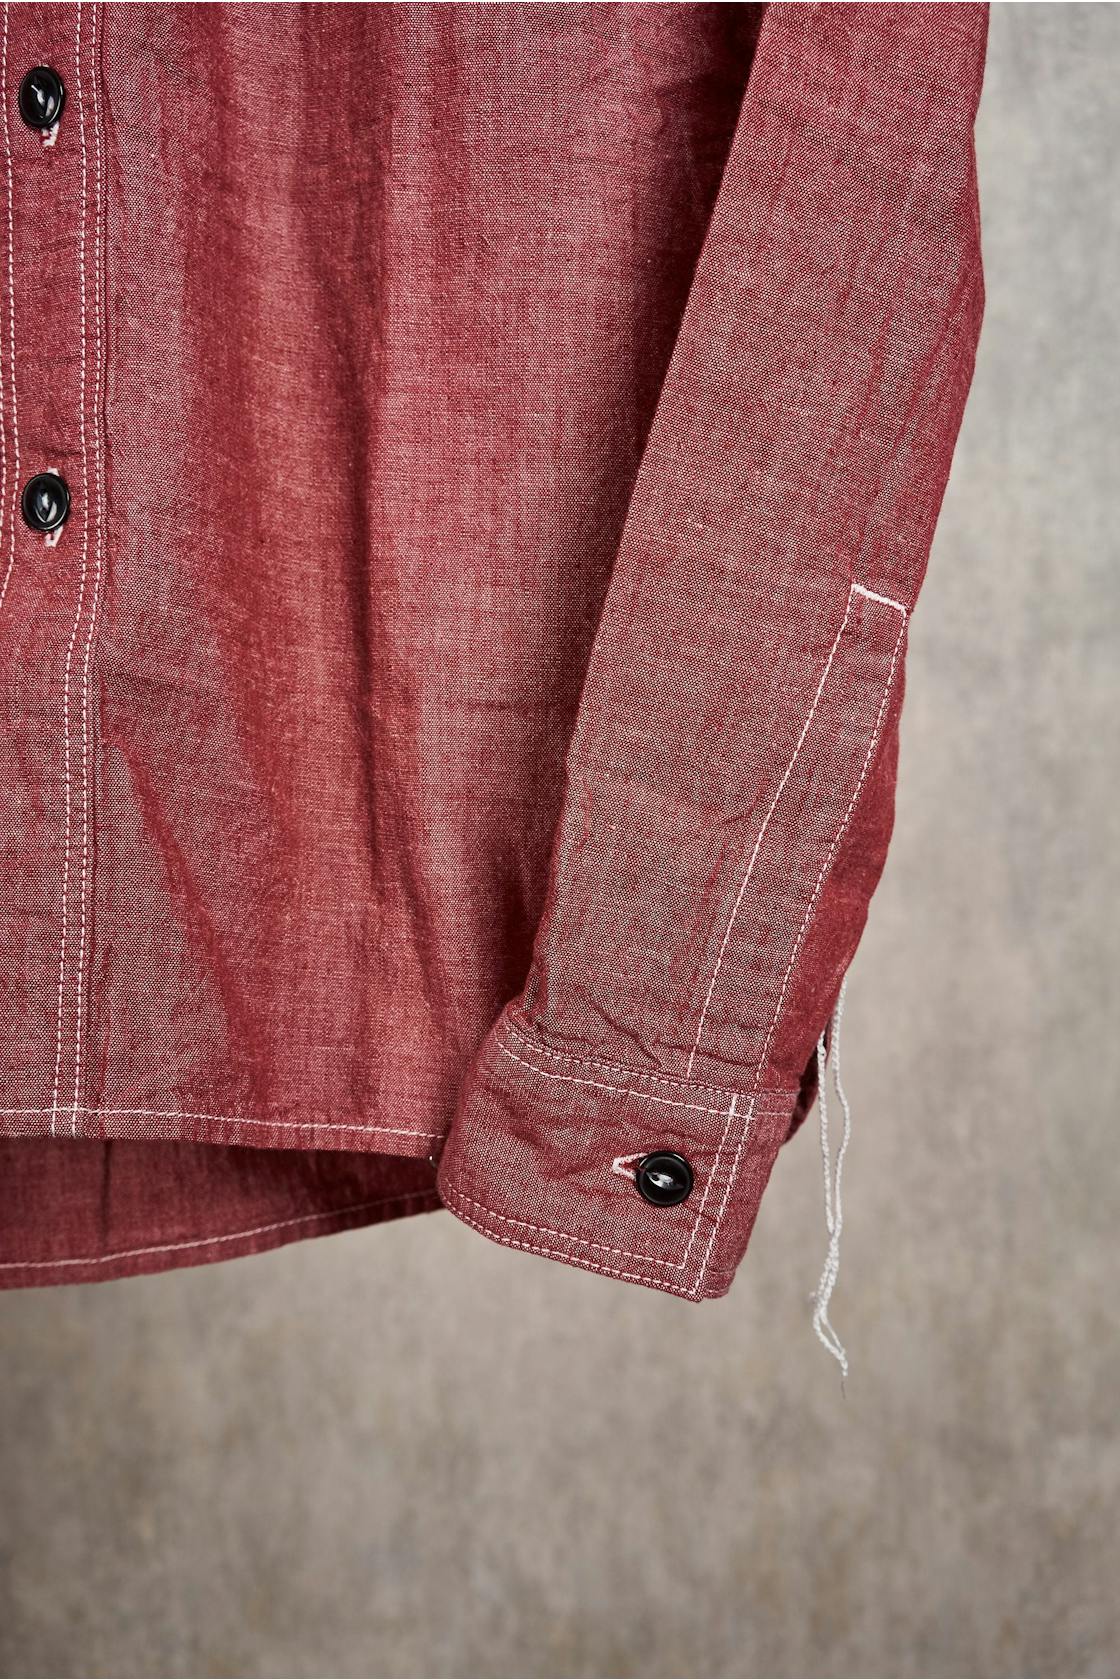 The Armoury Red Chambray Shirt